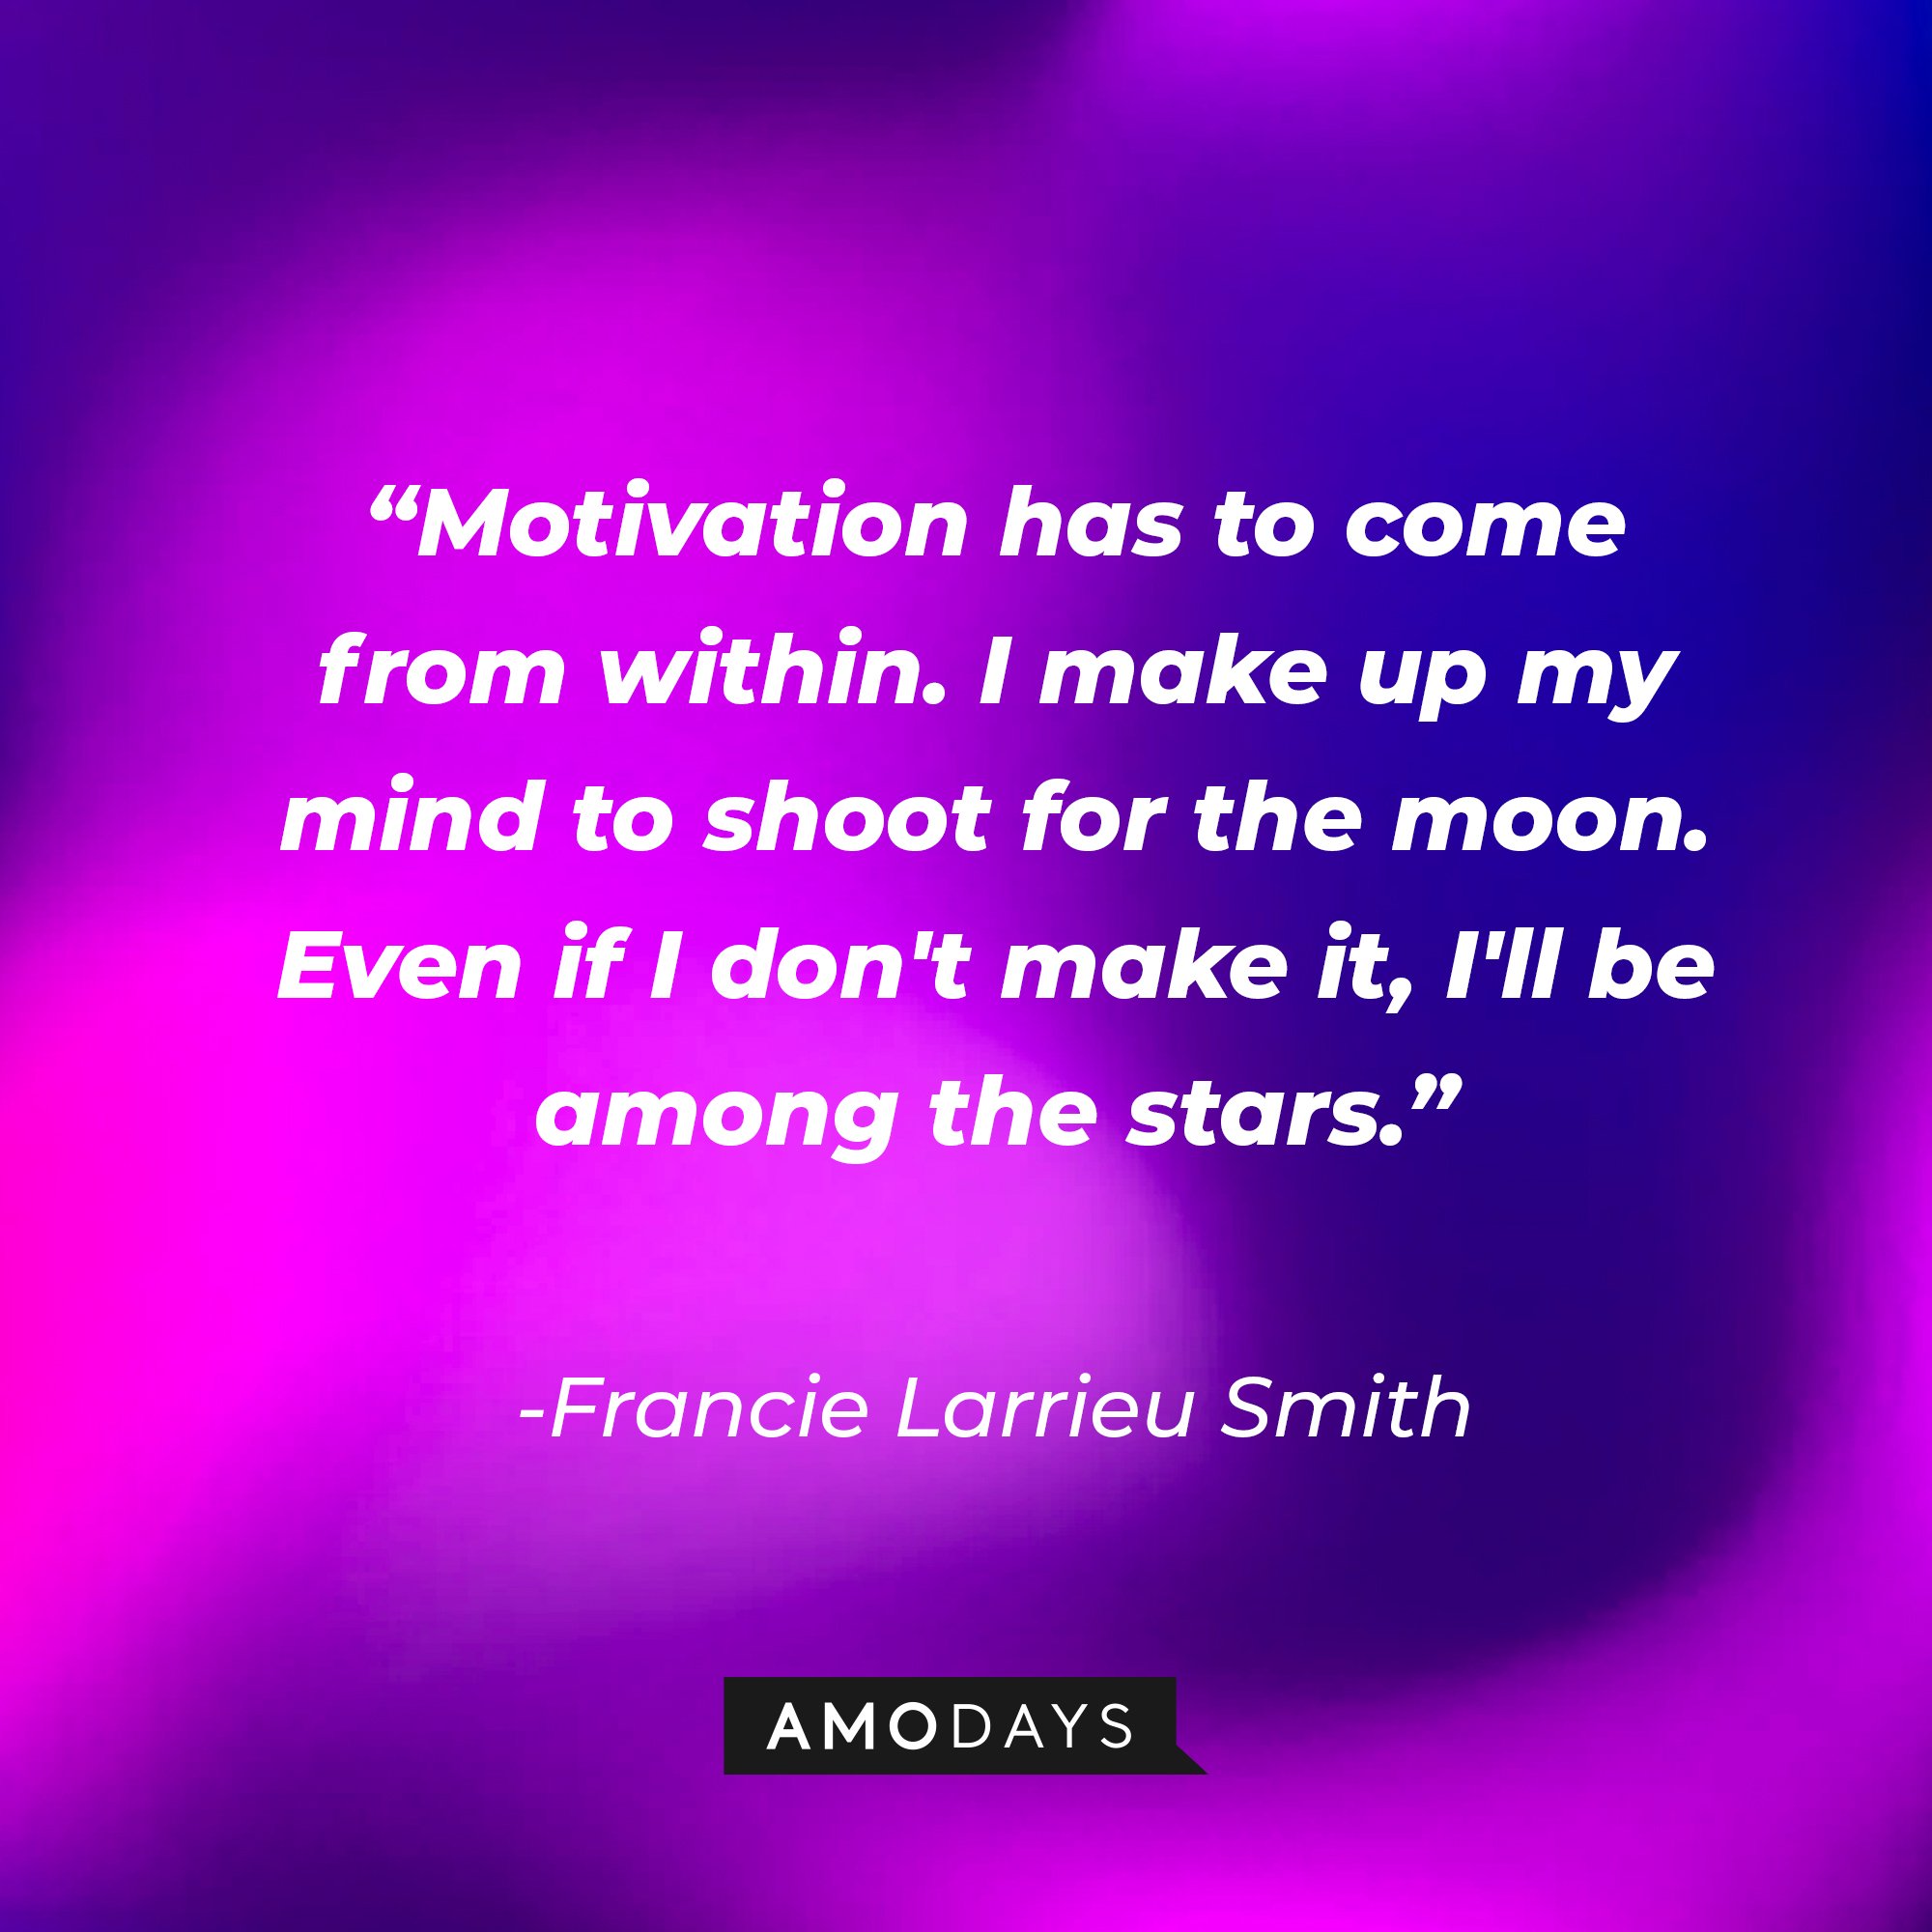 Francie Larrieu Smith's quote: “Motivation has to come from within. I make up my mind to shoot for the moon. Even if I don't make it, I'll be among the stars.” | Image: AmoDays